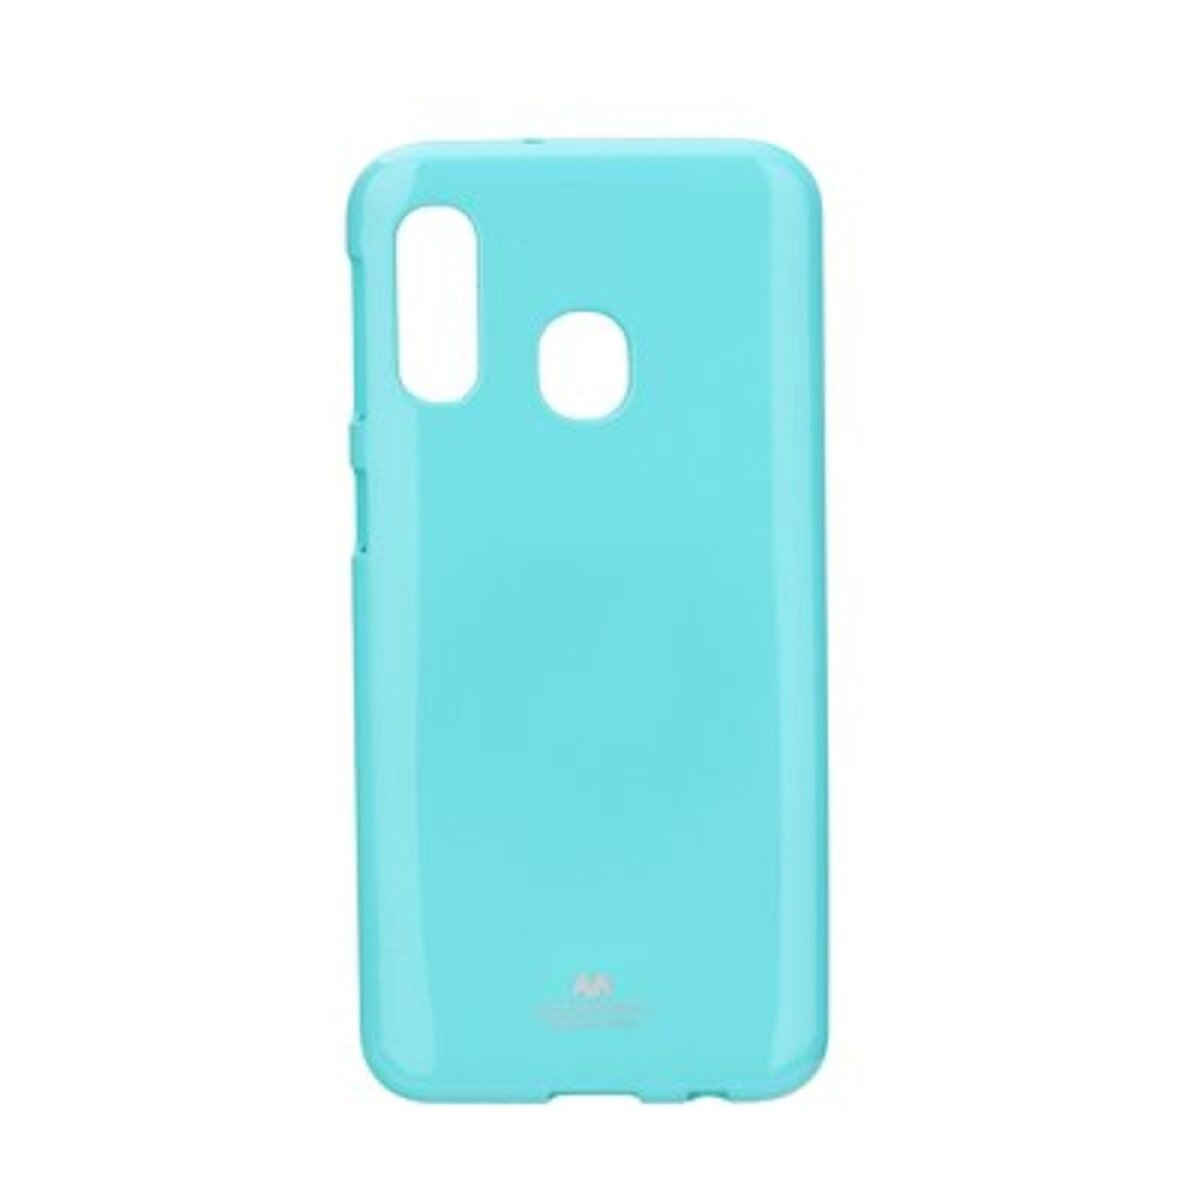 SM Jelly Case MERCURY Galaxy Samsung, available Galaxy minze, A40, A40 Bookcover, Not